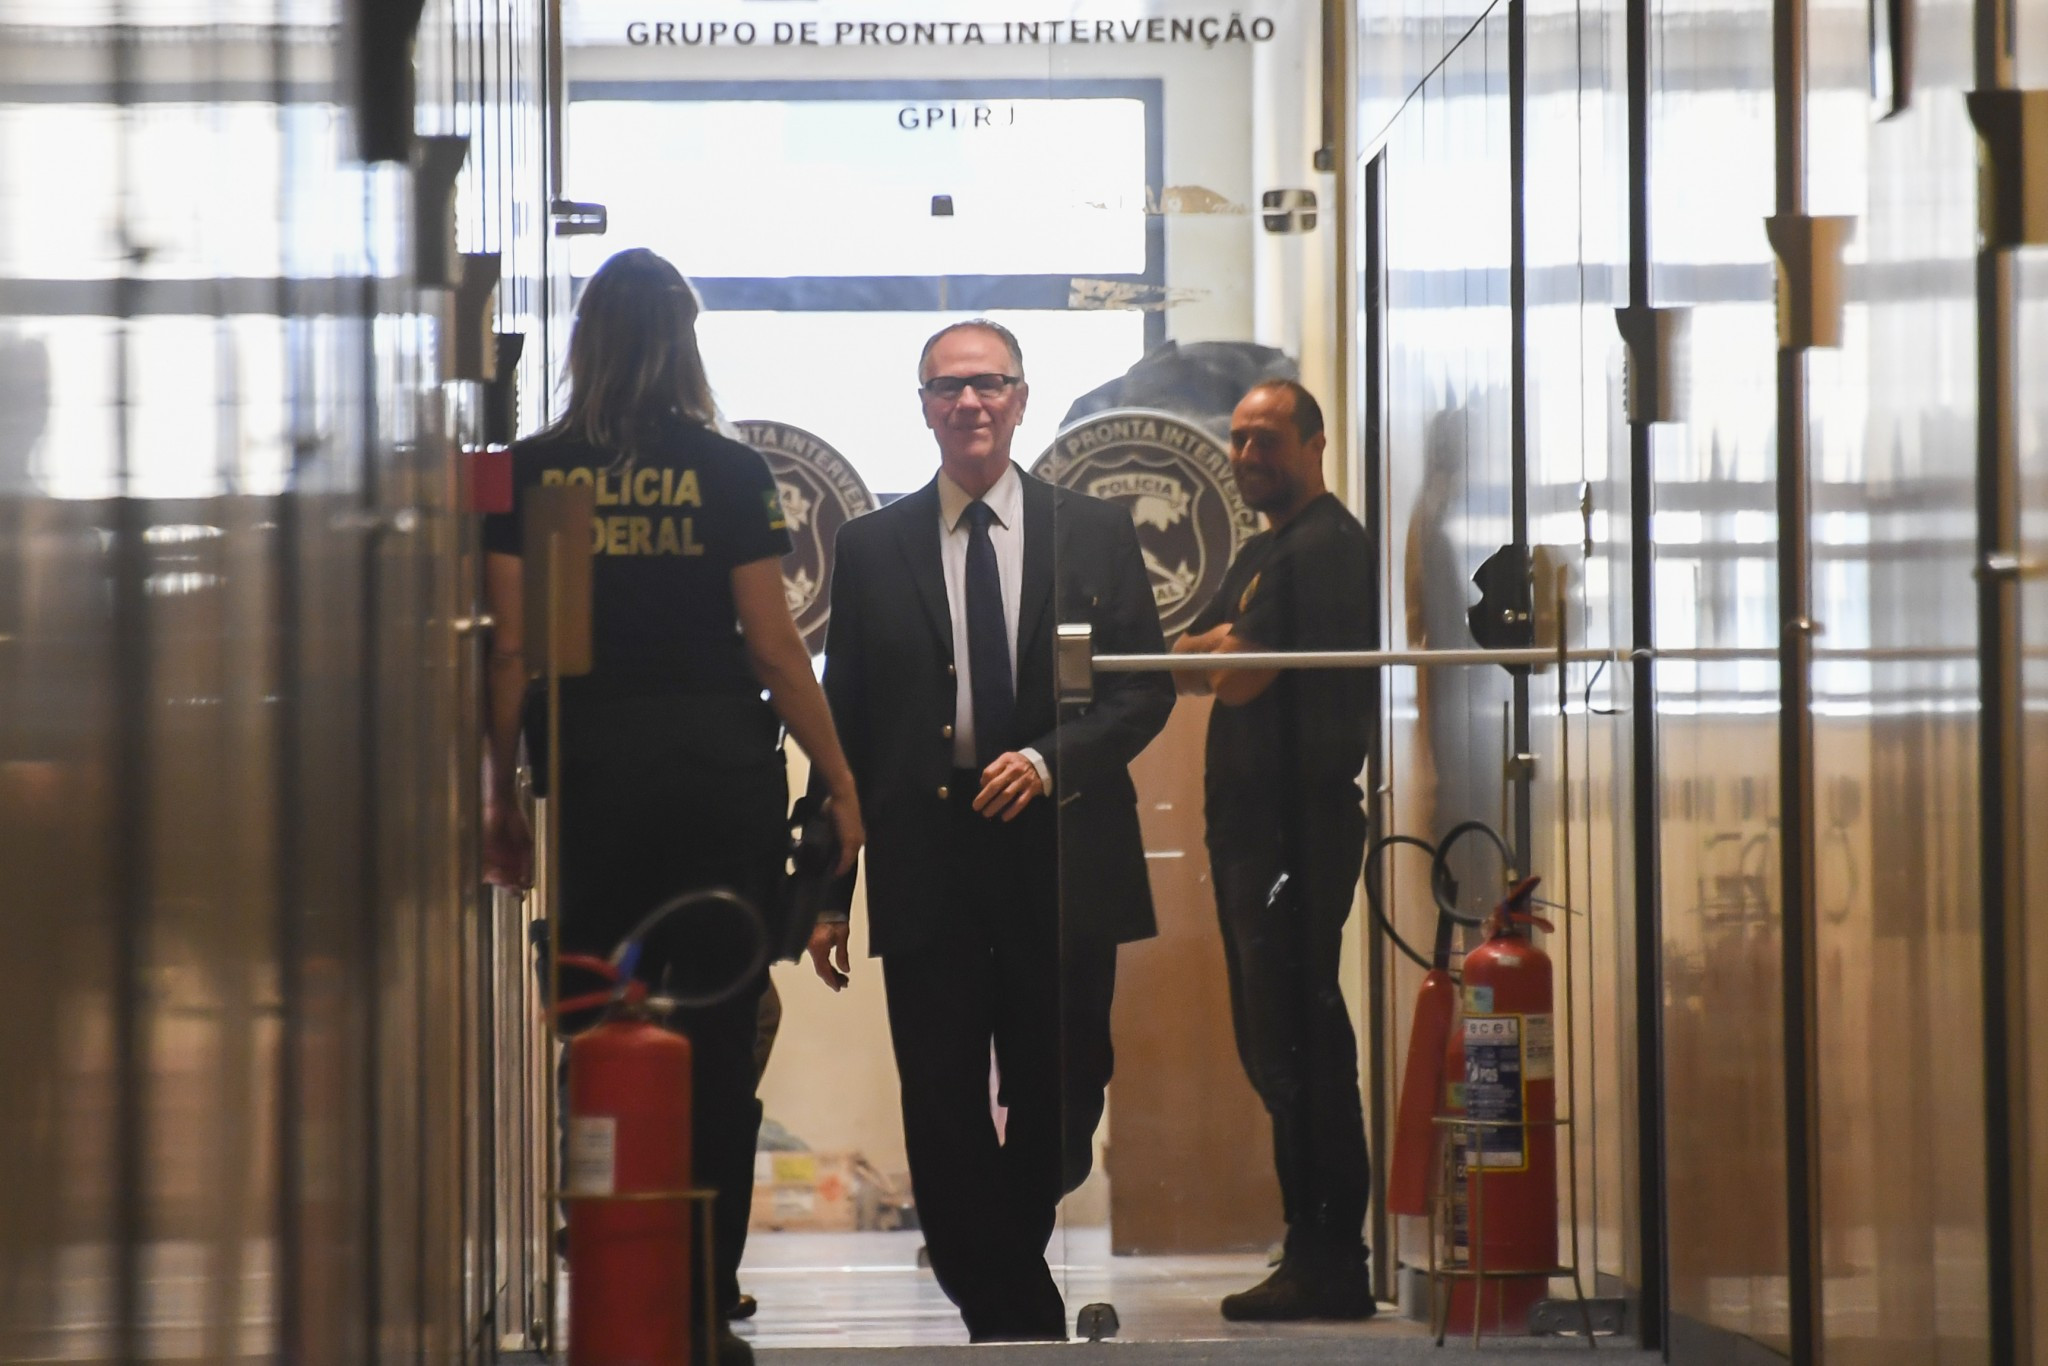 Rio 2016 President and honorary IOC member Carlos Nuzman was taken into custody by Brazilian police in Rio de Janeiro earlier this week following allegations of vote-buying ©Getty Images